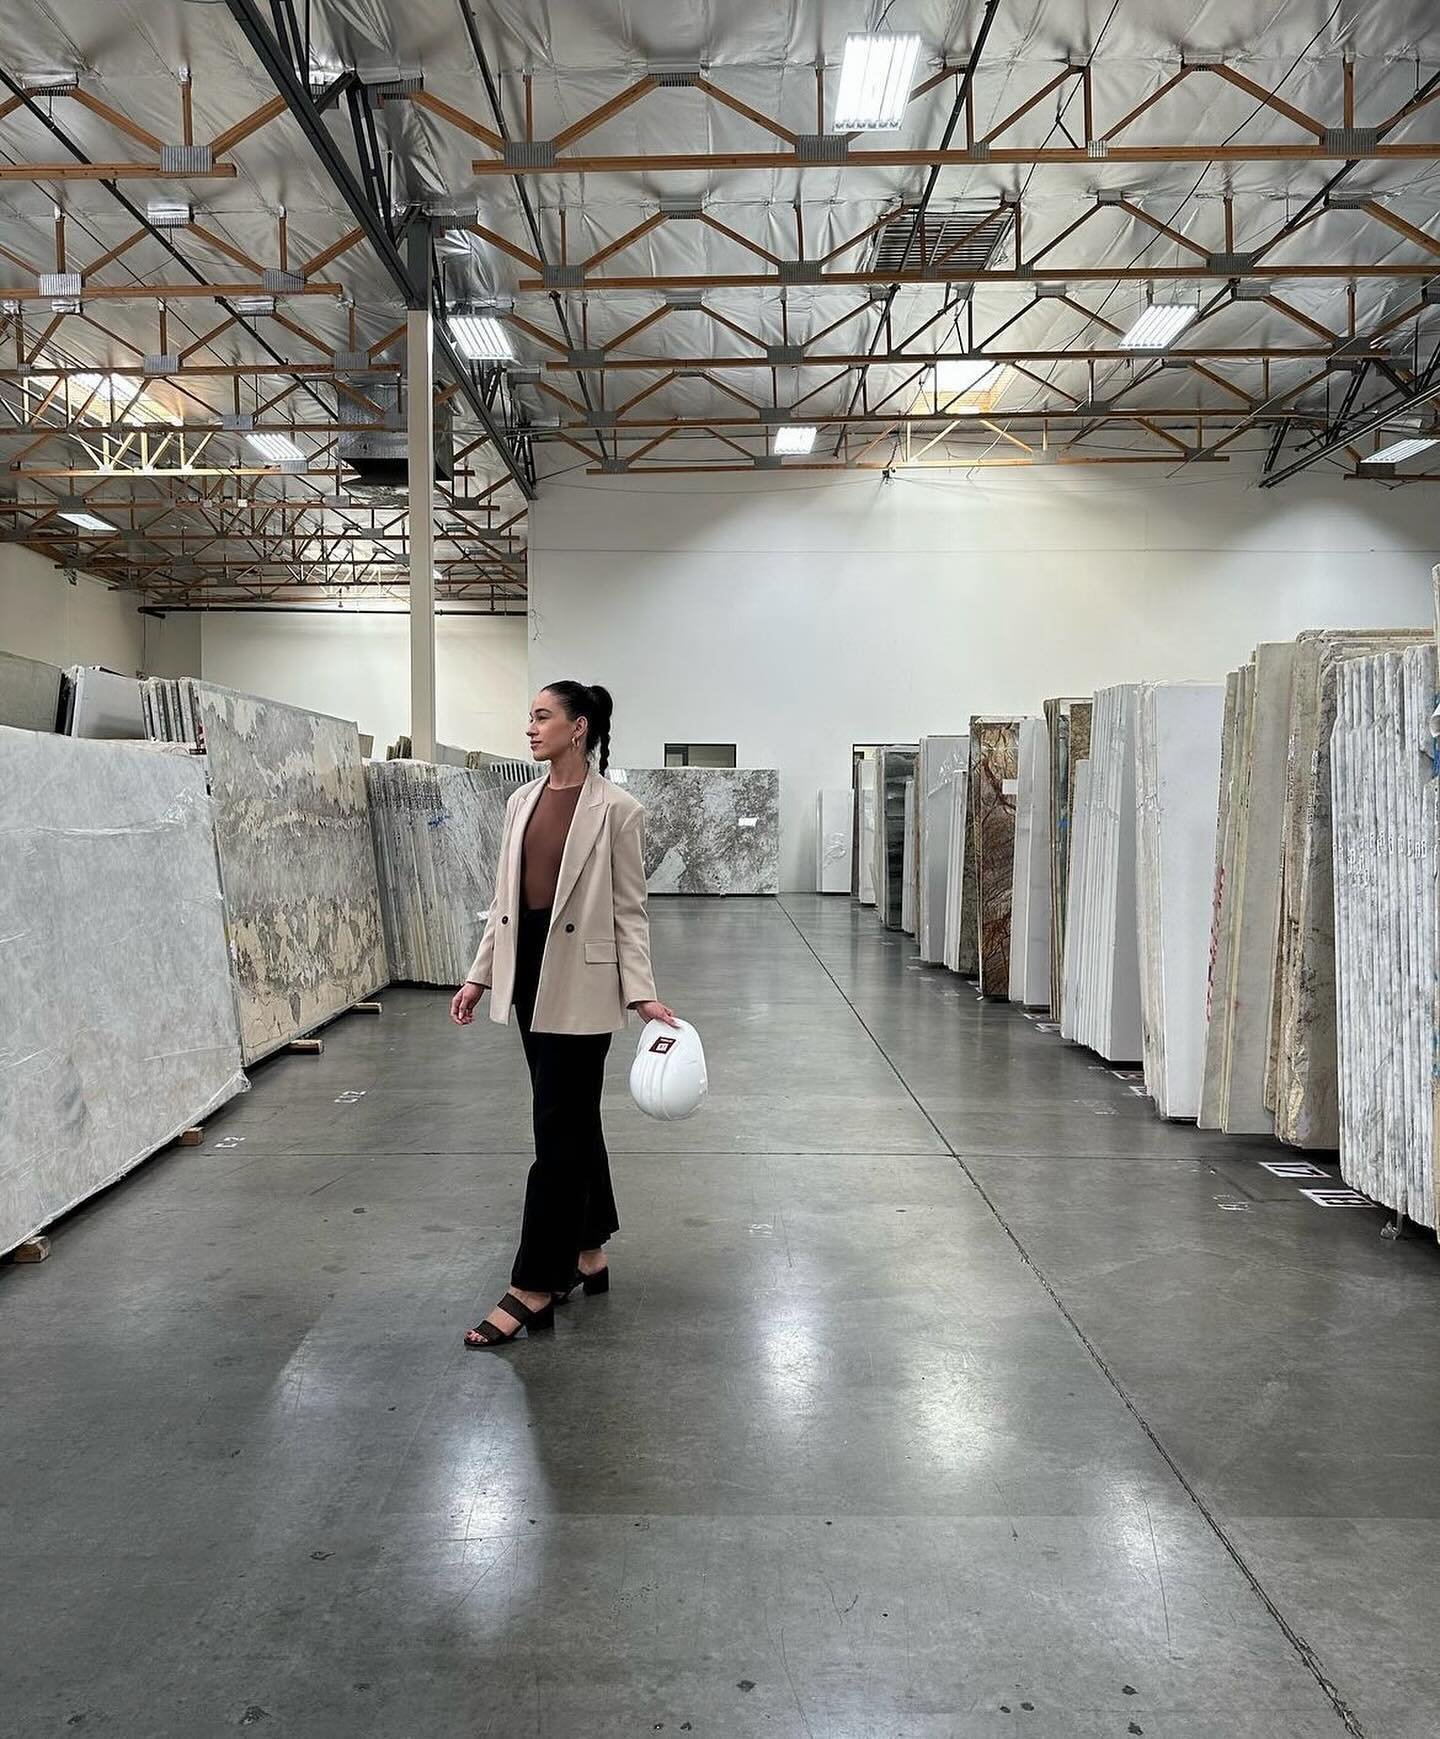 We&rsquo;re always here for a trip to Arista 🙌 

A little bit about us- we&rsquo;re your one stop shop for all things stone. We&rsquo;ve been serving the valley since 2017, quickly growing into the boutique business that you know us as today. 

Not 